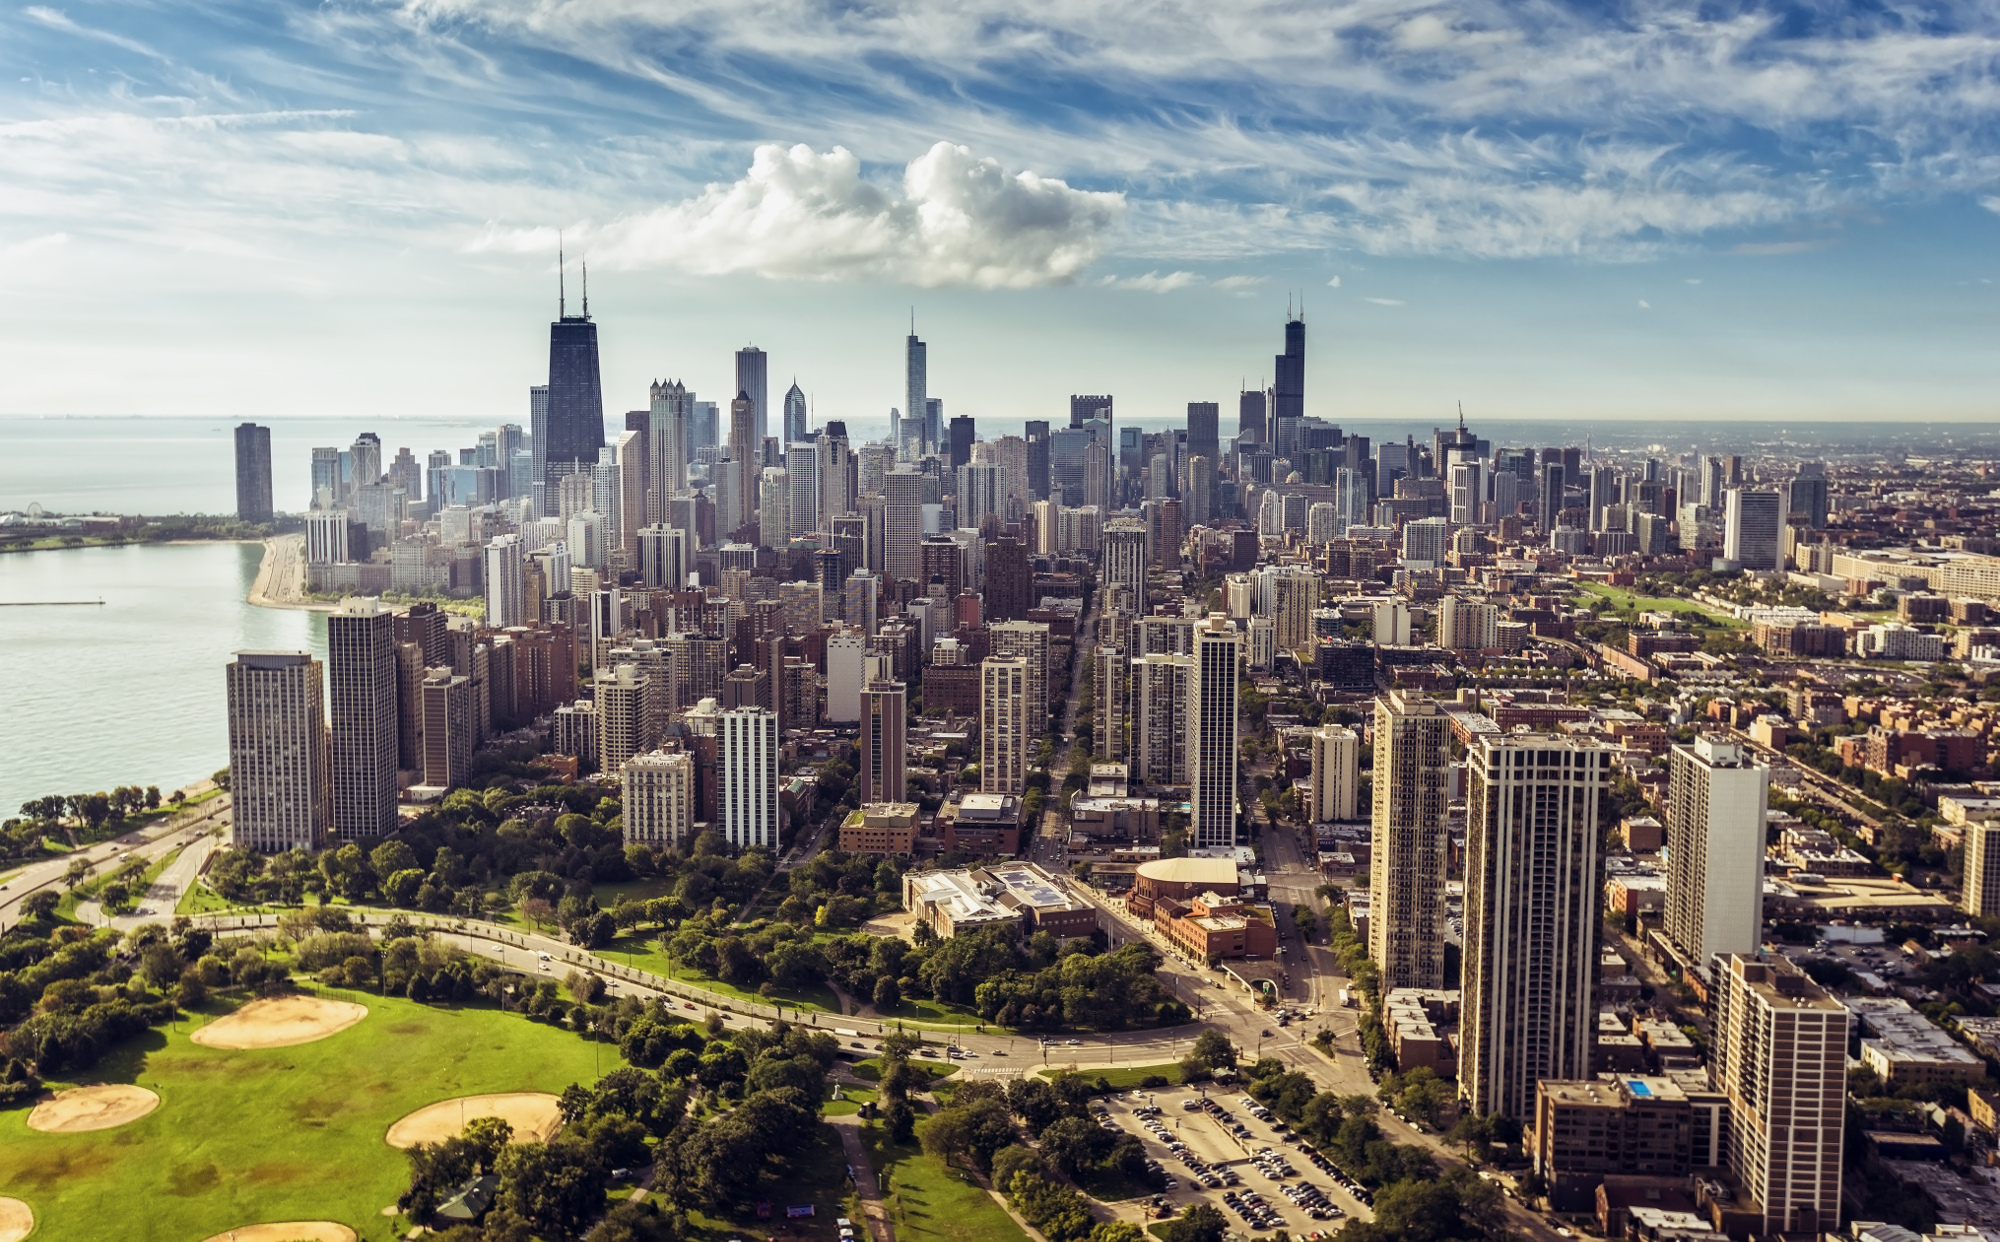 Chicago tops the list of best cities around the world